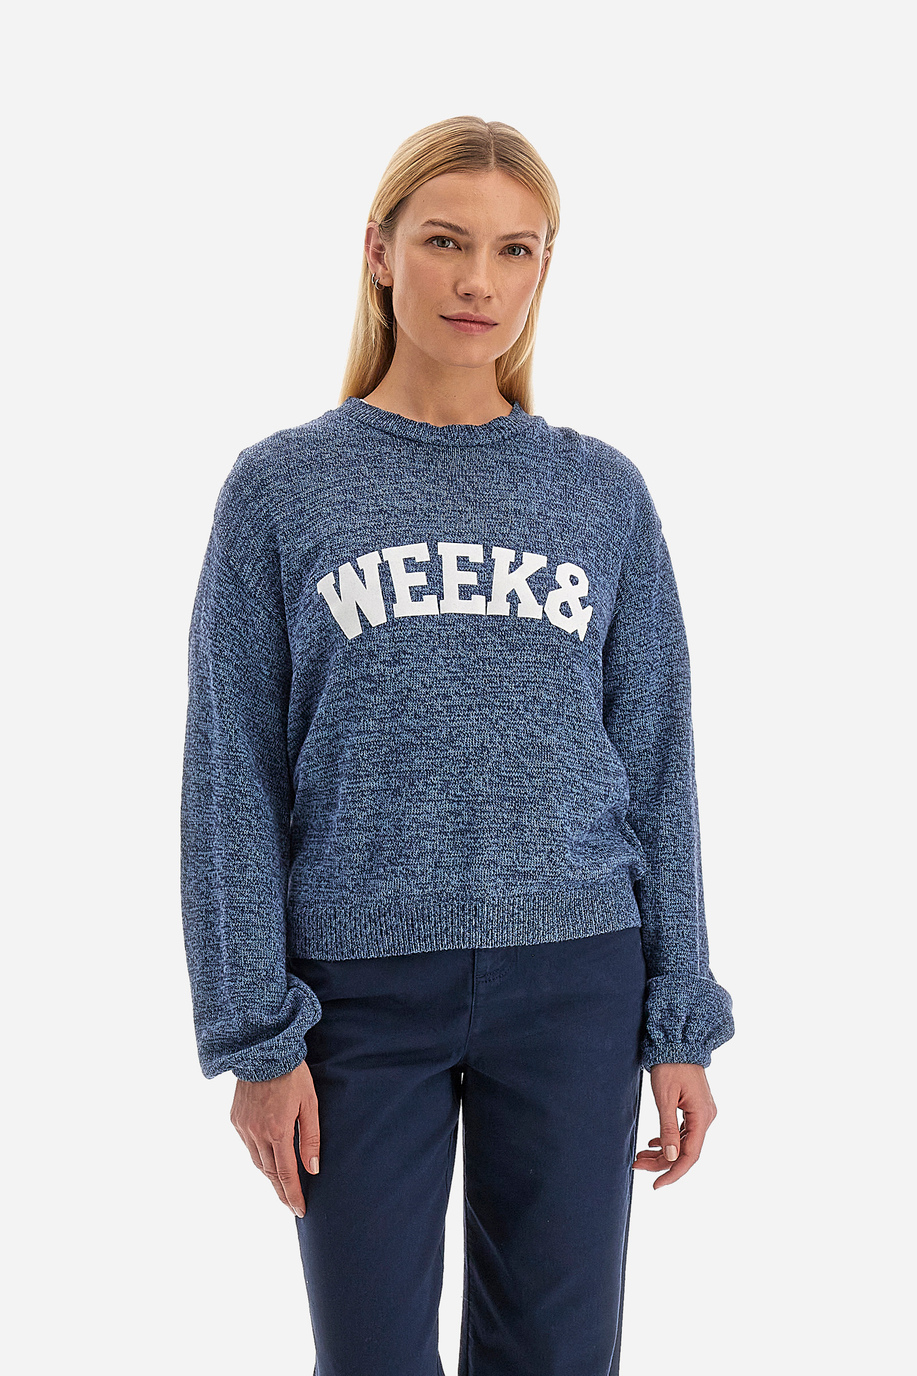 Women's round-neck long-sleeved sweater with Spring Weekend logo - Videl - Knitwear | La Martina - Official Online Shop